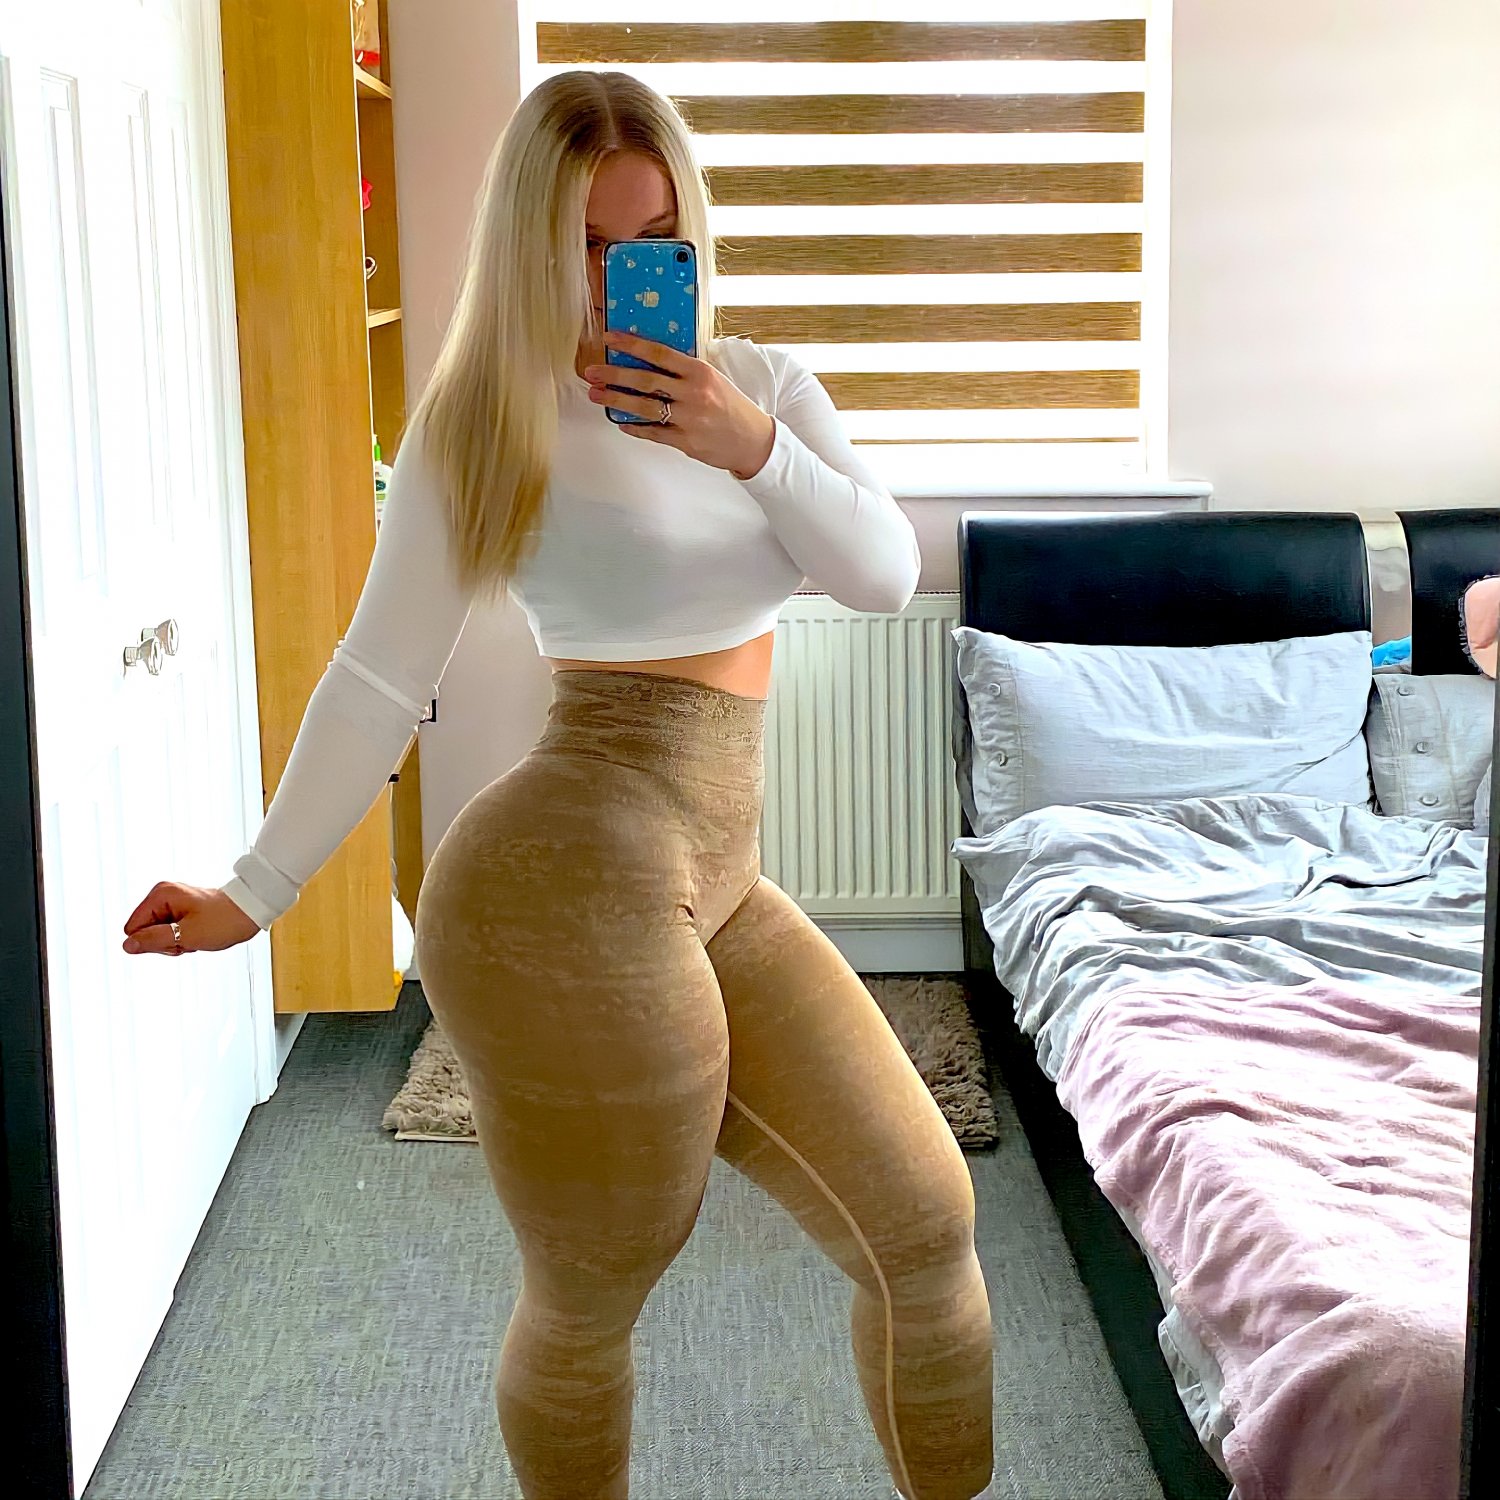 Norwegian Queen MewTwo - Porn Videos and Photos pic pic pic